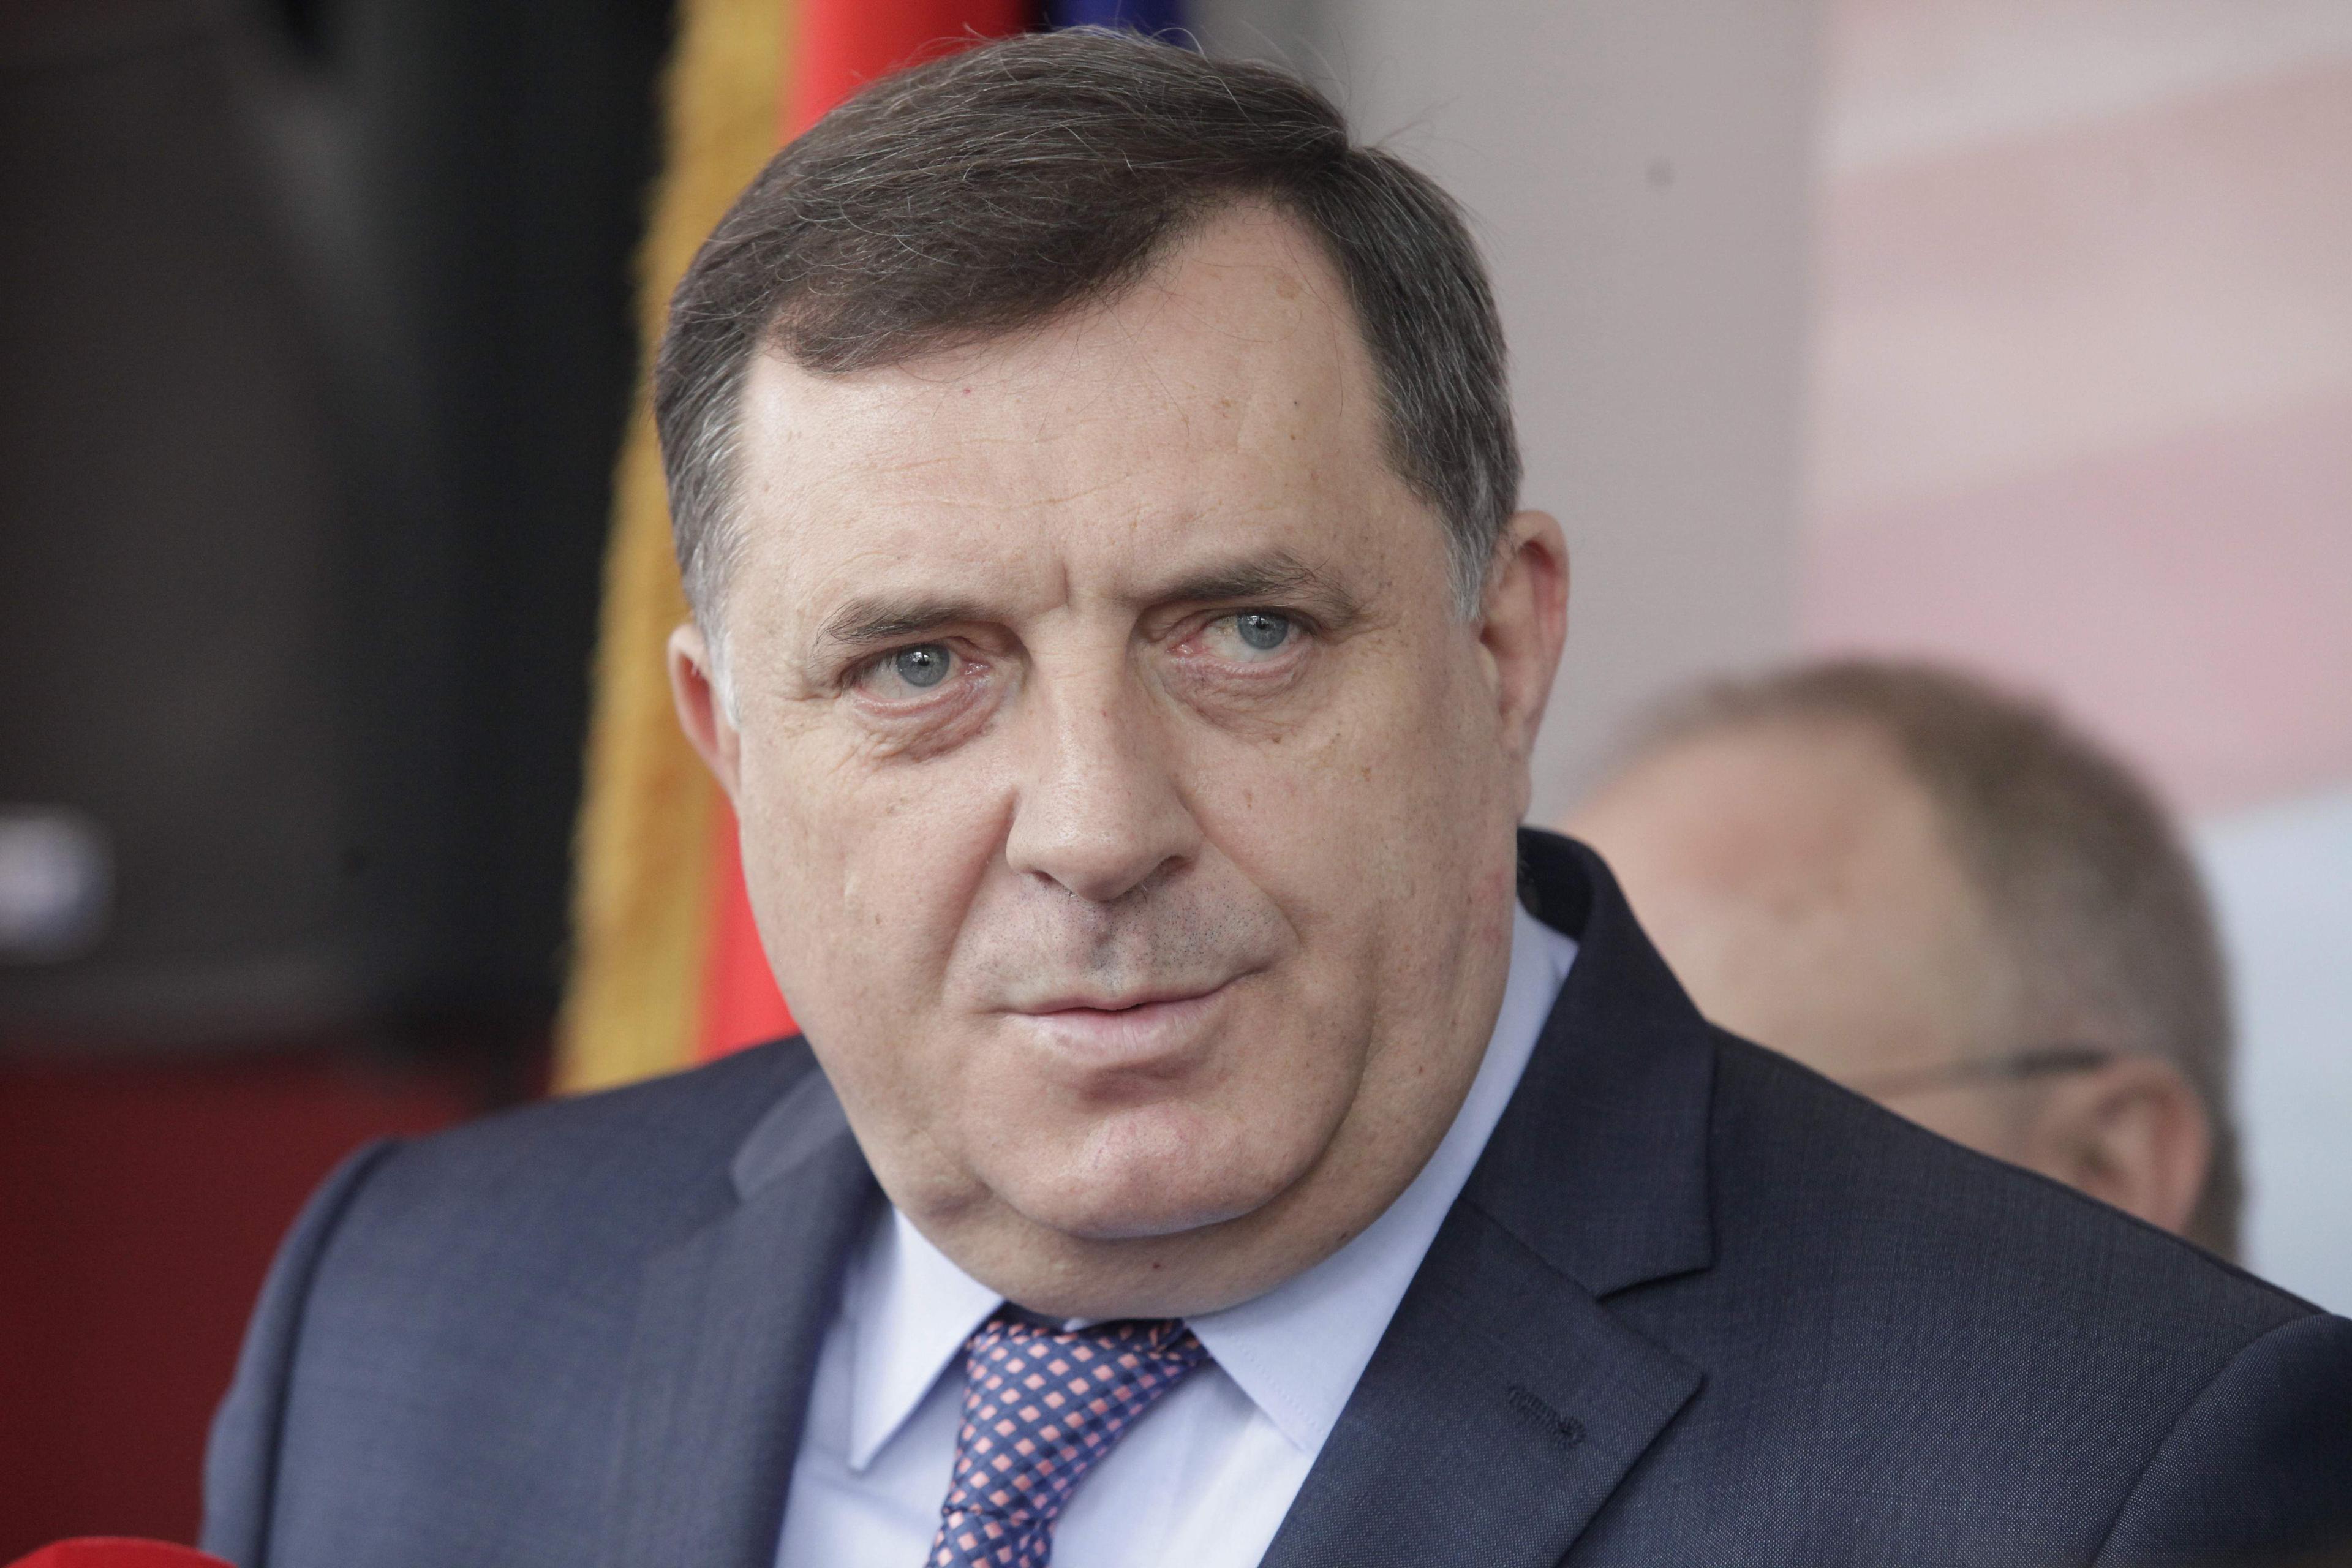 Dodik: There will be no opening of camps in RS - Avaz